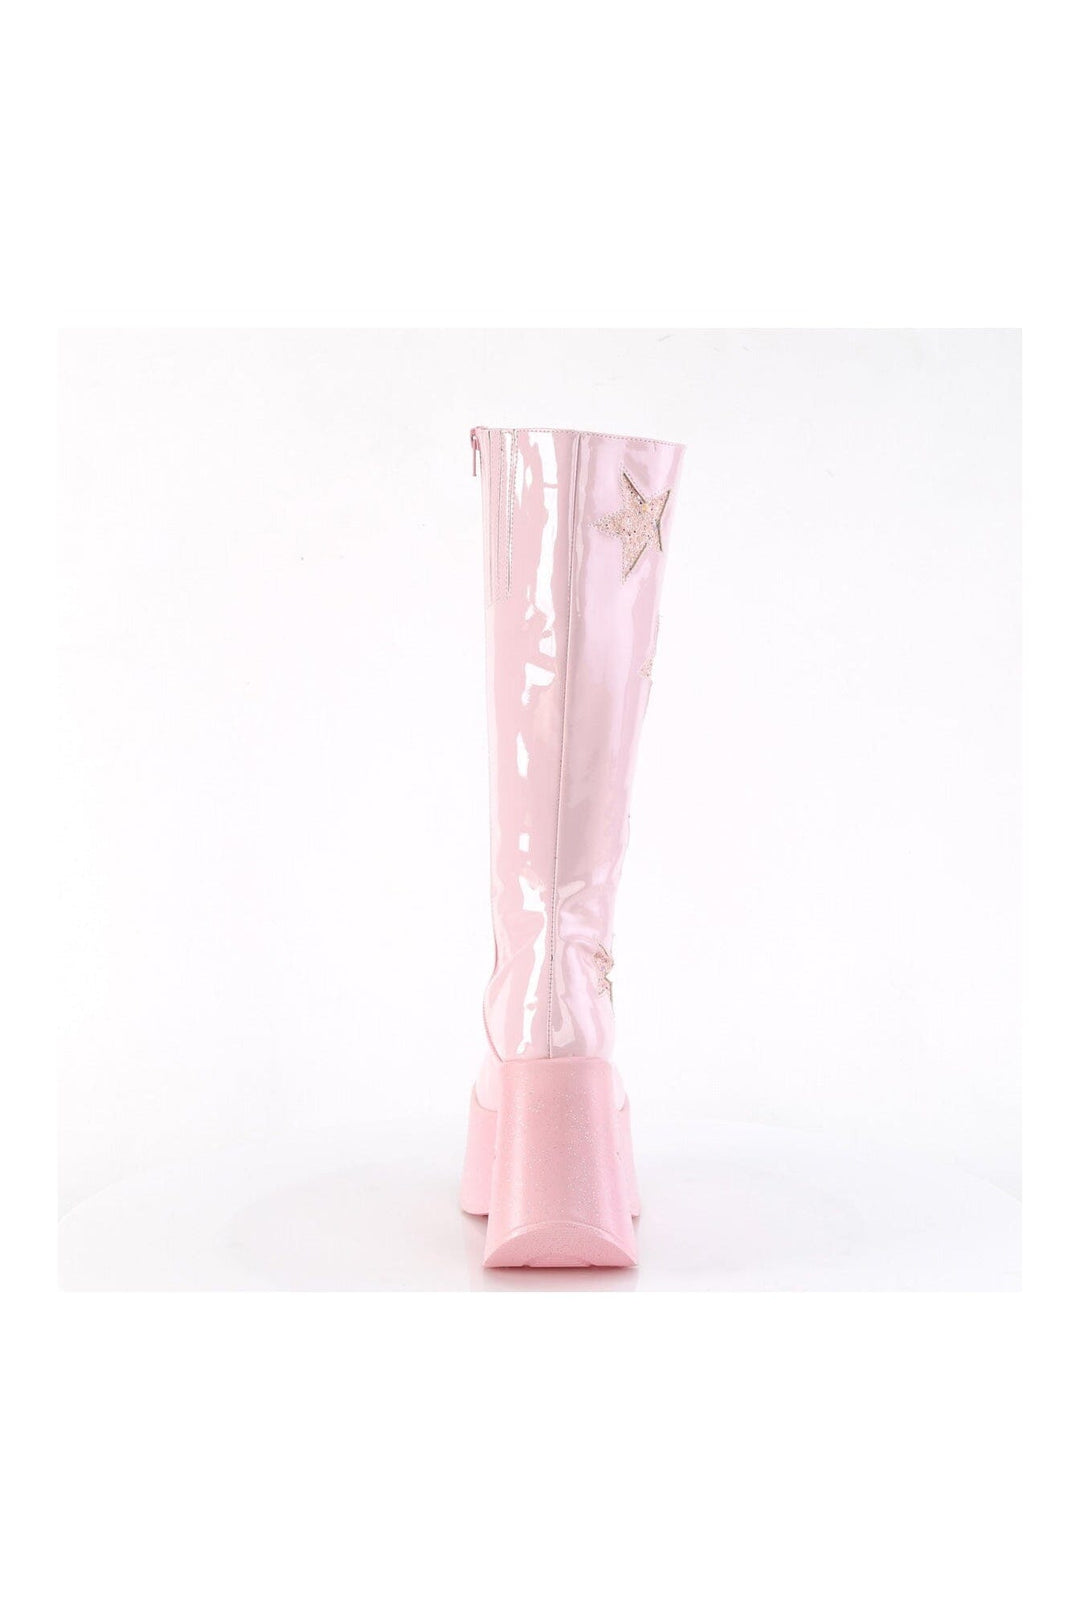 DYNAMITE-218 Pink Glitter Knee Boot-Knee Boots-Demonia-SEXYSHOES.COM